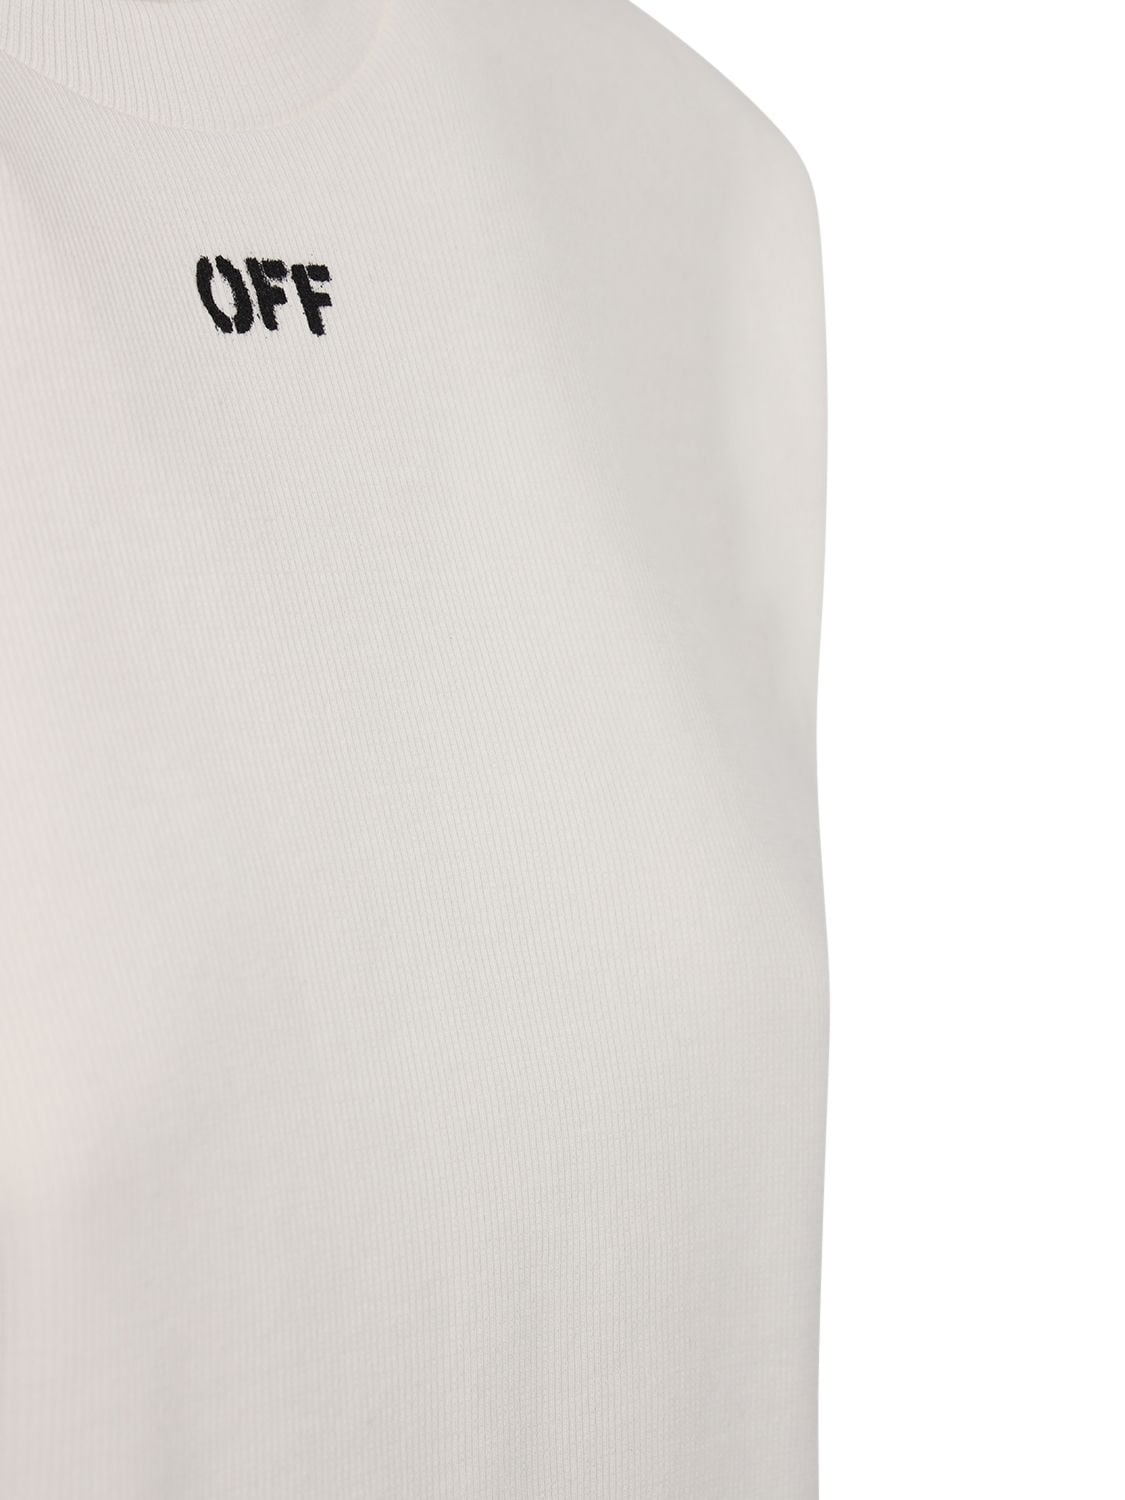 OFF-WHITE CROPPED LOGO PRINTED COTTON T-SHIRT 